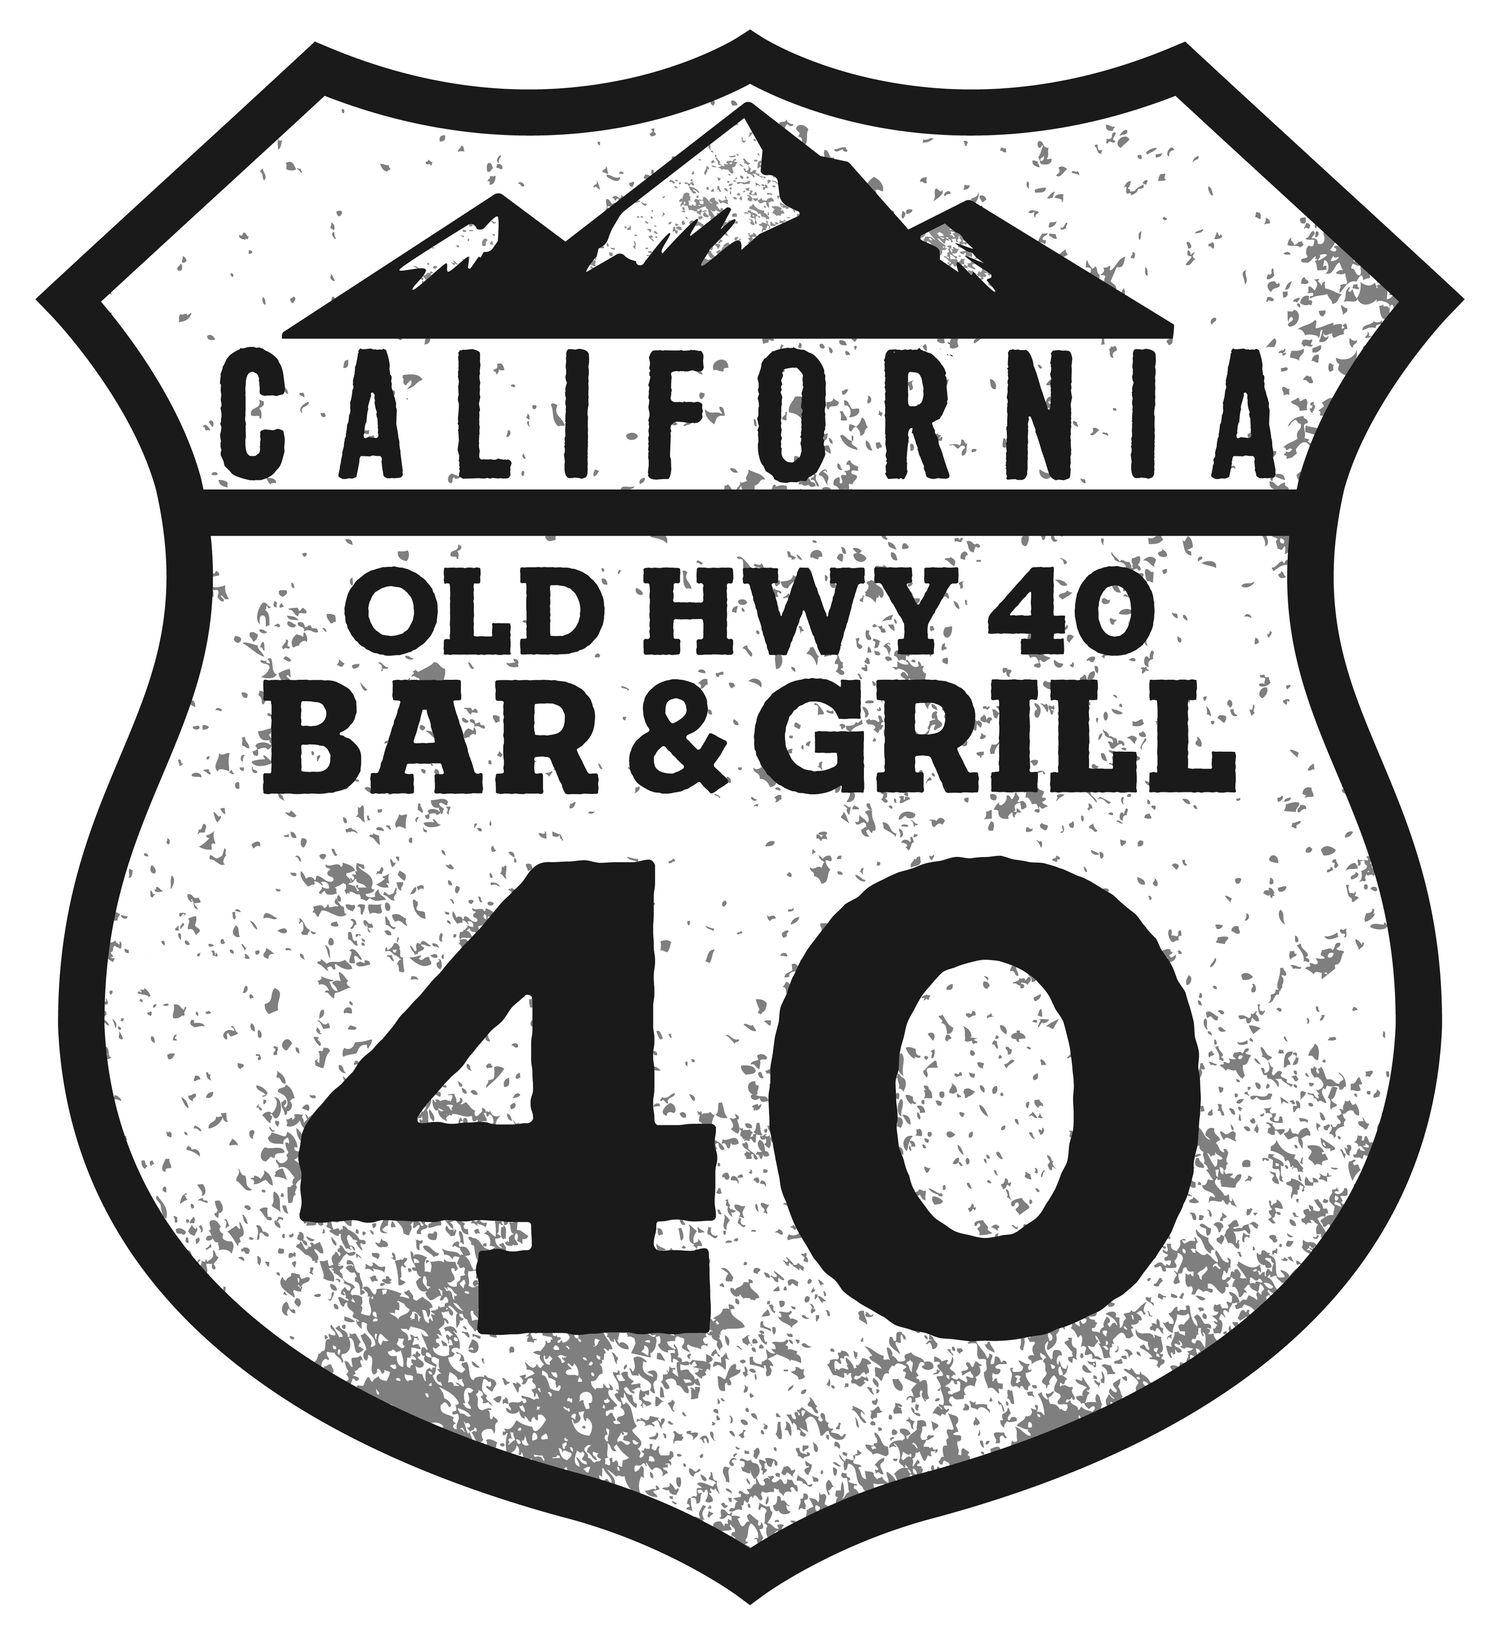 OLD 40 BAR & GRILL